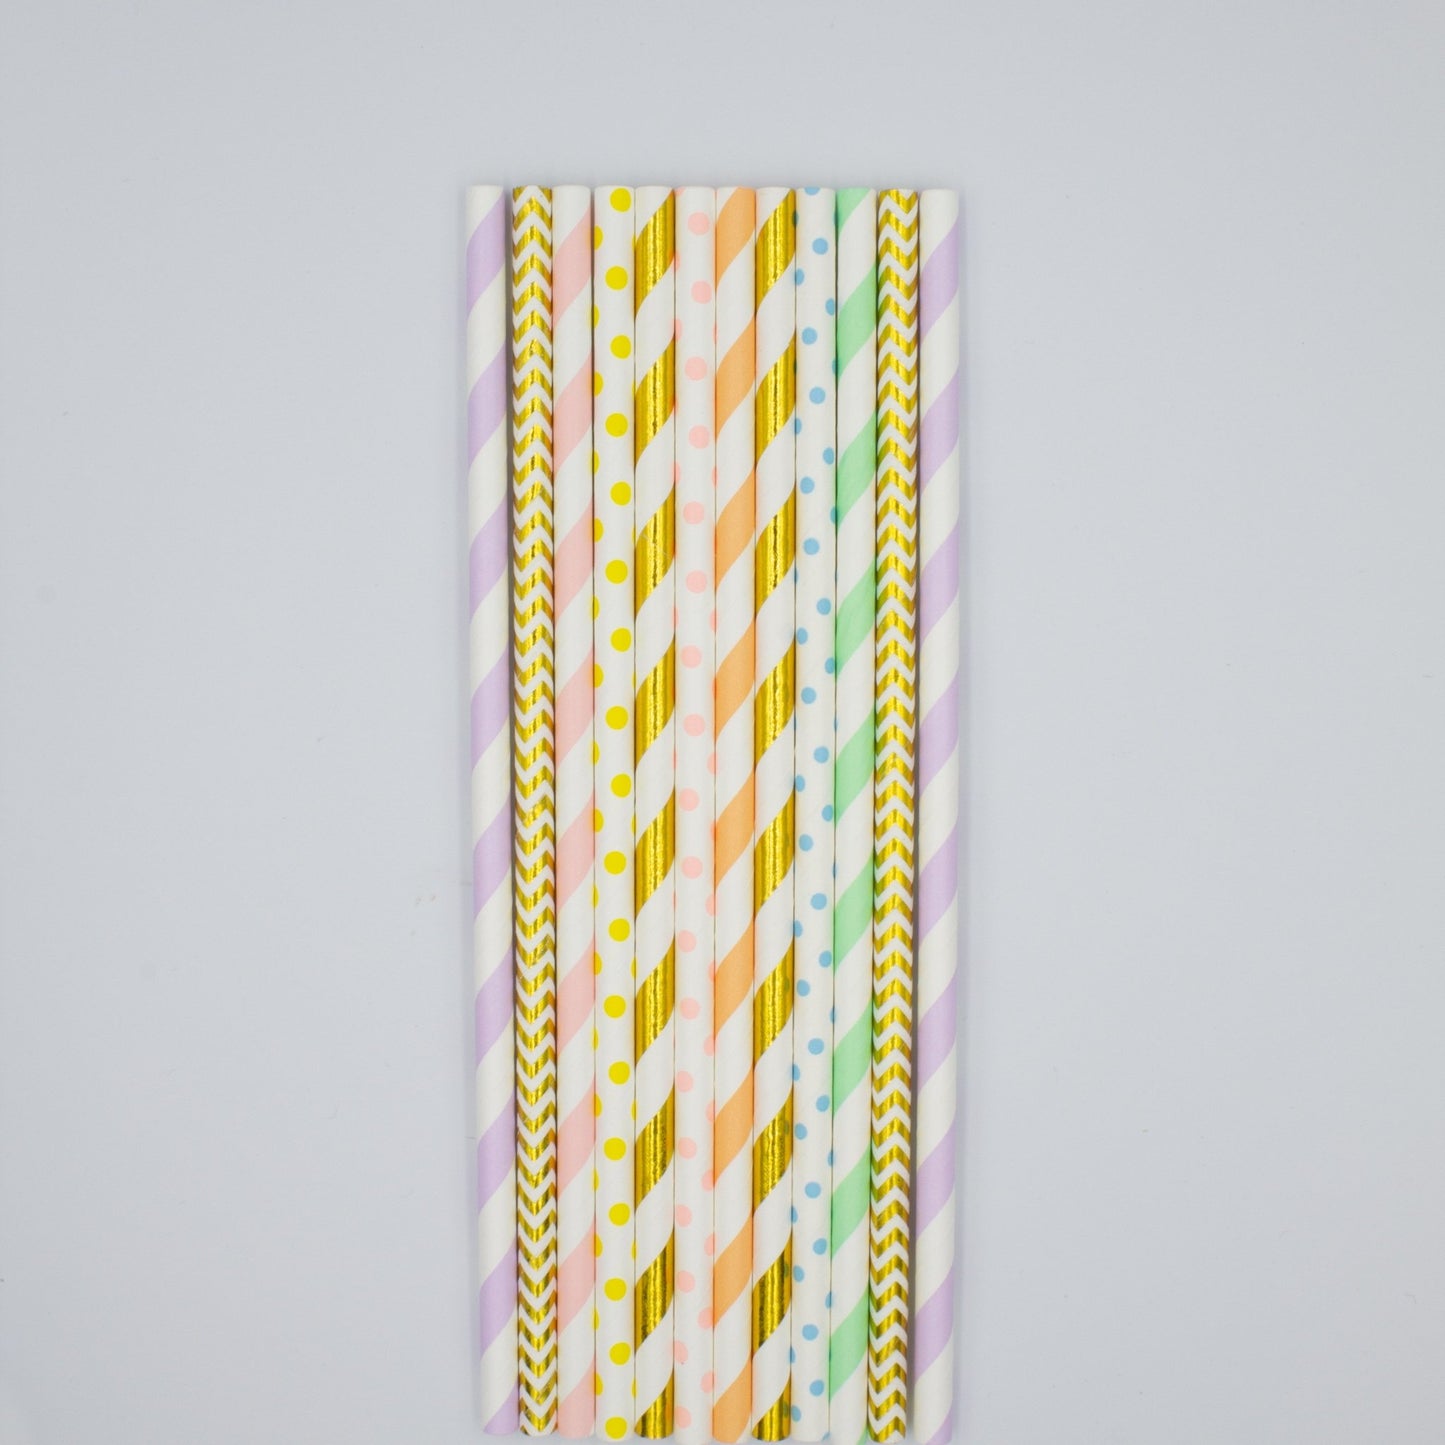 Pastel Rainbow Paper Straws in Pink, Orange, Yellow, Green, Blue, Purple, Gold (Set of 12) - Ellie's Party Supply